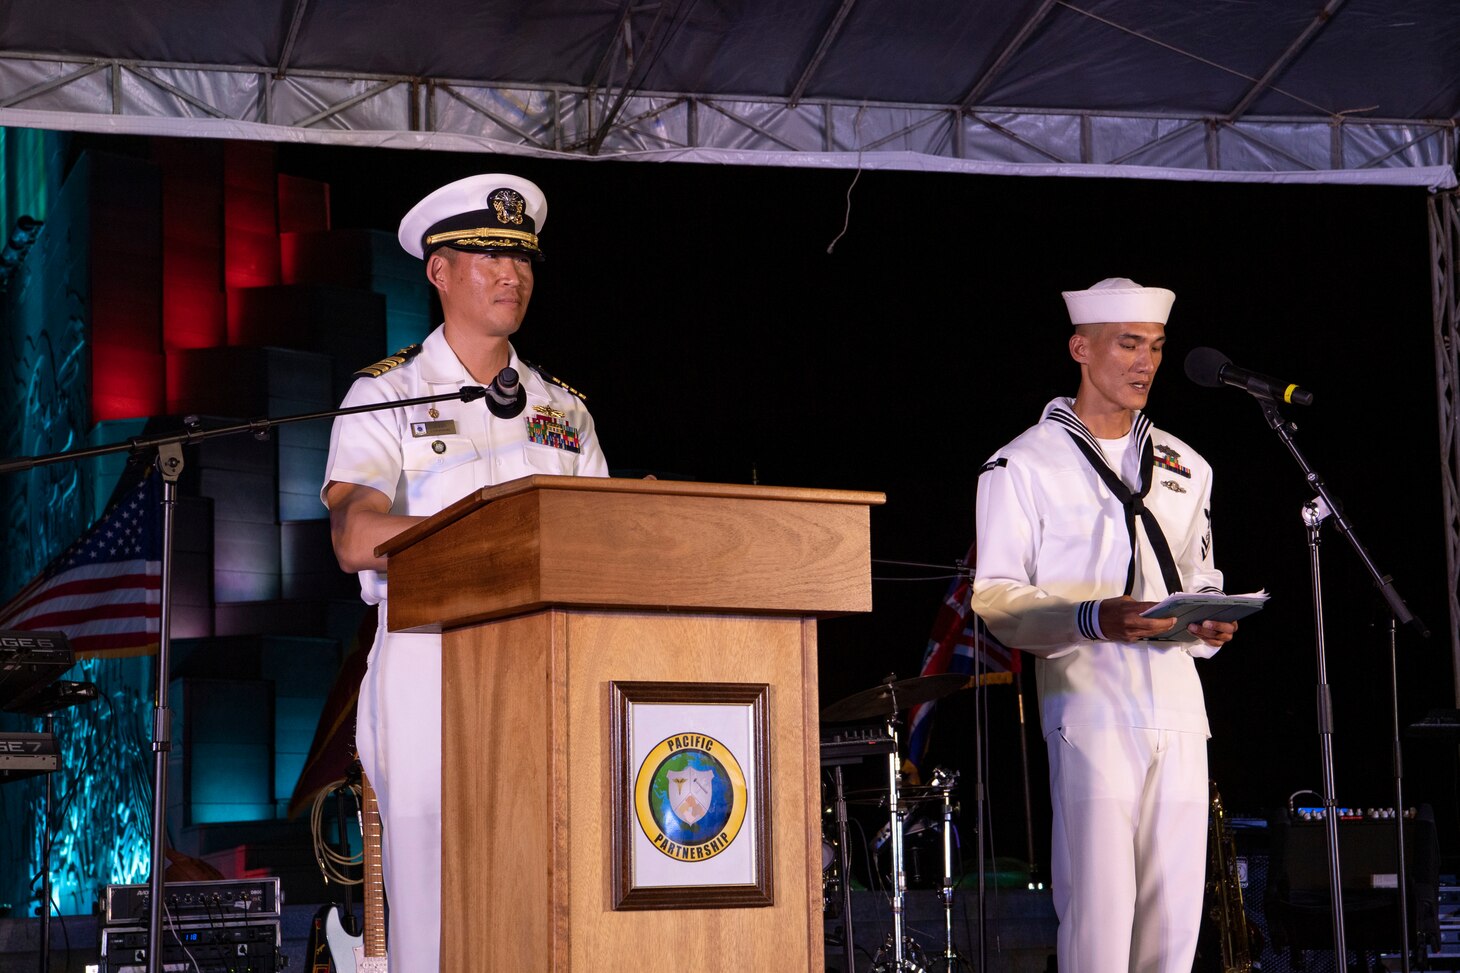 PHU YEN, Vietnam (June 20, 2022) – Capt. Hank Kim, Pacific Partnership 2022 mission commander, left, delivers remarks during the Pacific Partnership Vietnam opening ceremony. Now in its 17th year, Pacific Partnership is the largest annual multinational humanitarian assistance and disaster relief preparedness mission conducted in the Indo-Pacific. (U.S. Navy photo by Mass Communication Specialist 2nd Class Brandie Nuzzi)